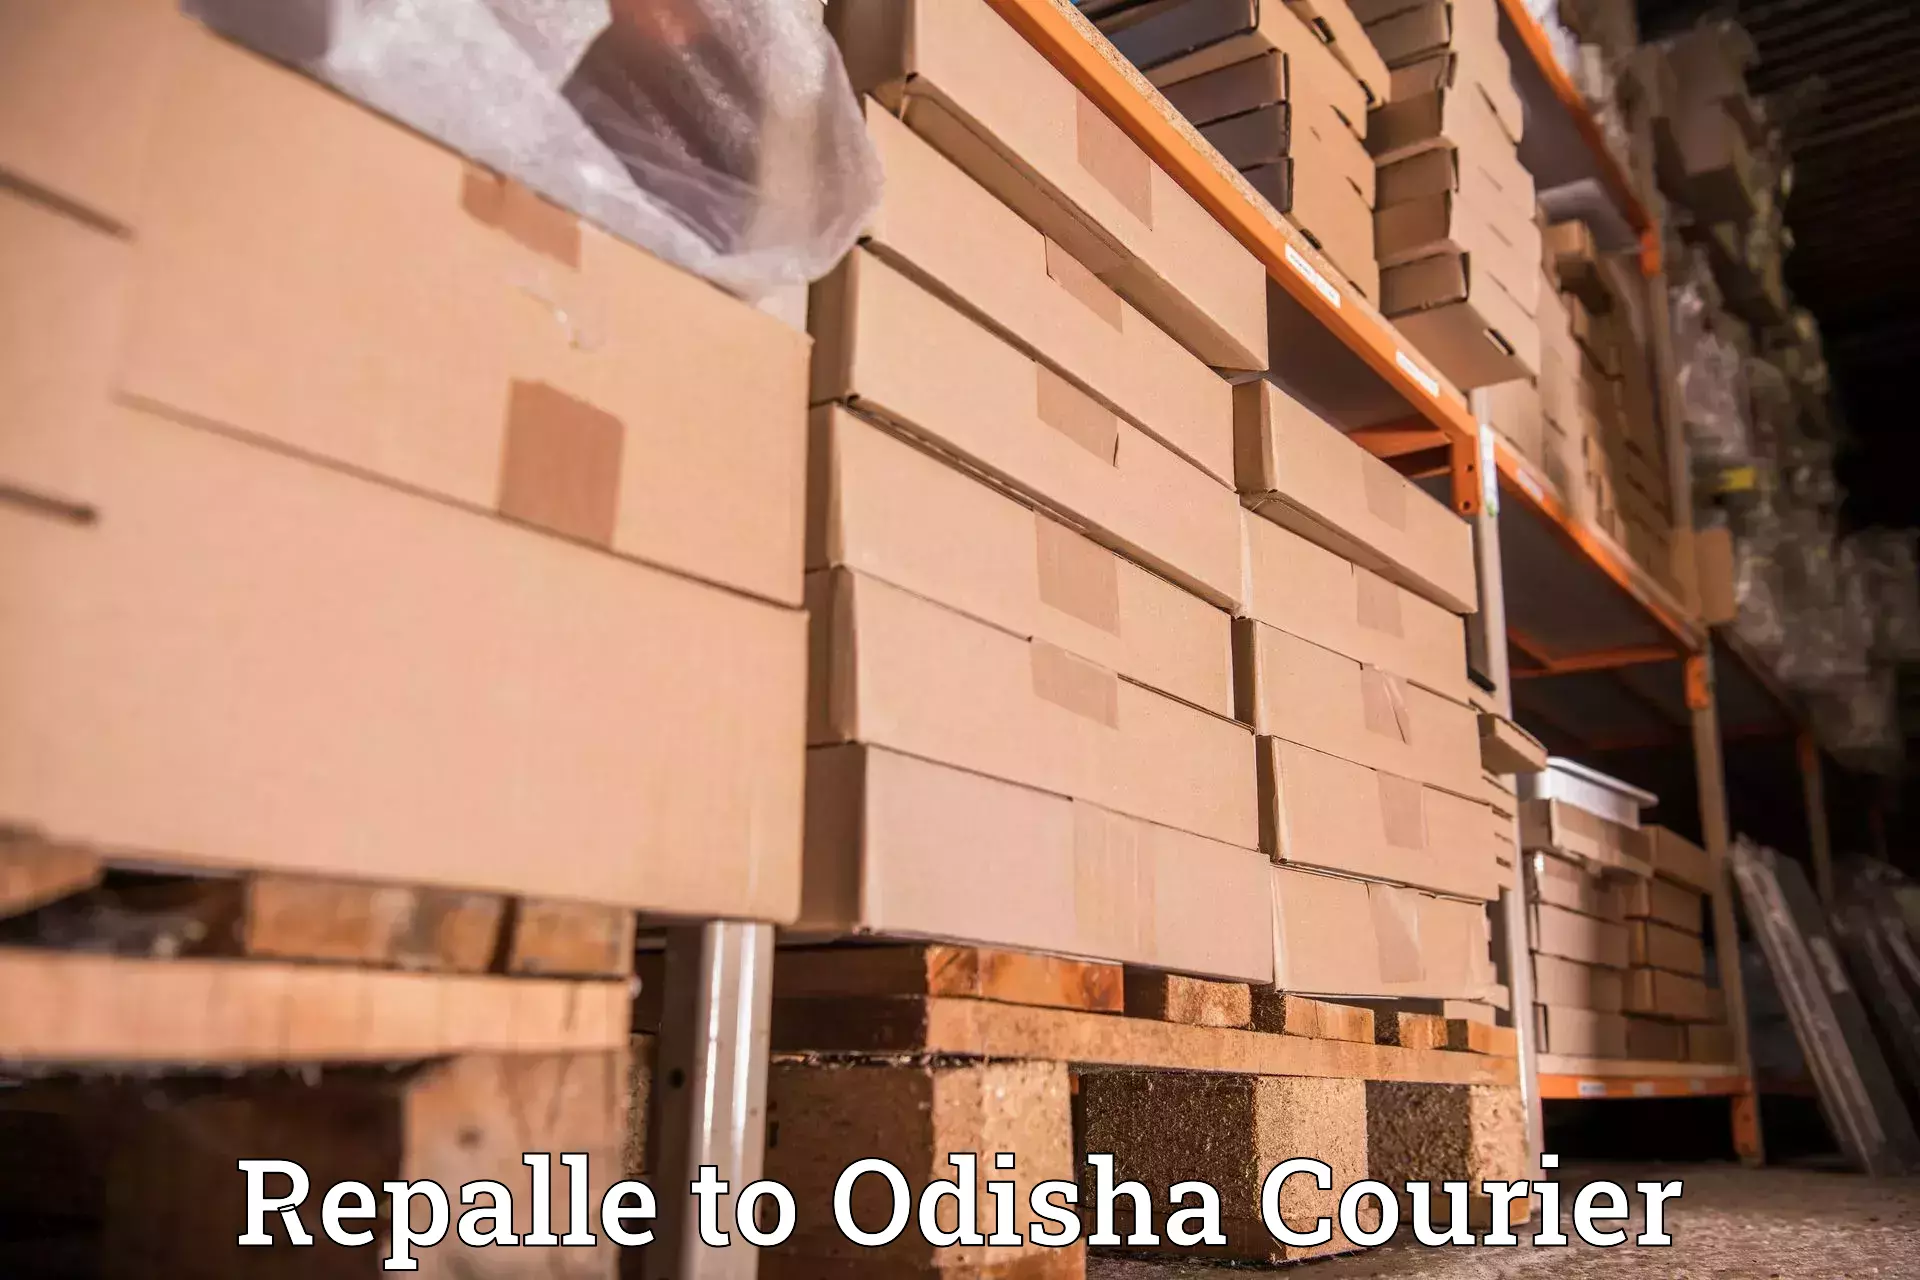 Courier tracking online Repalle to Jaipatna